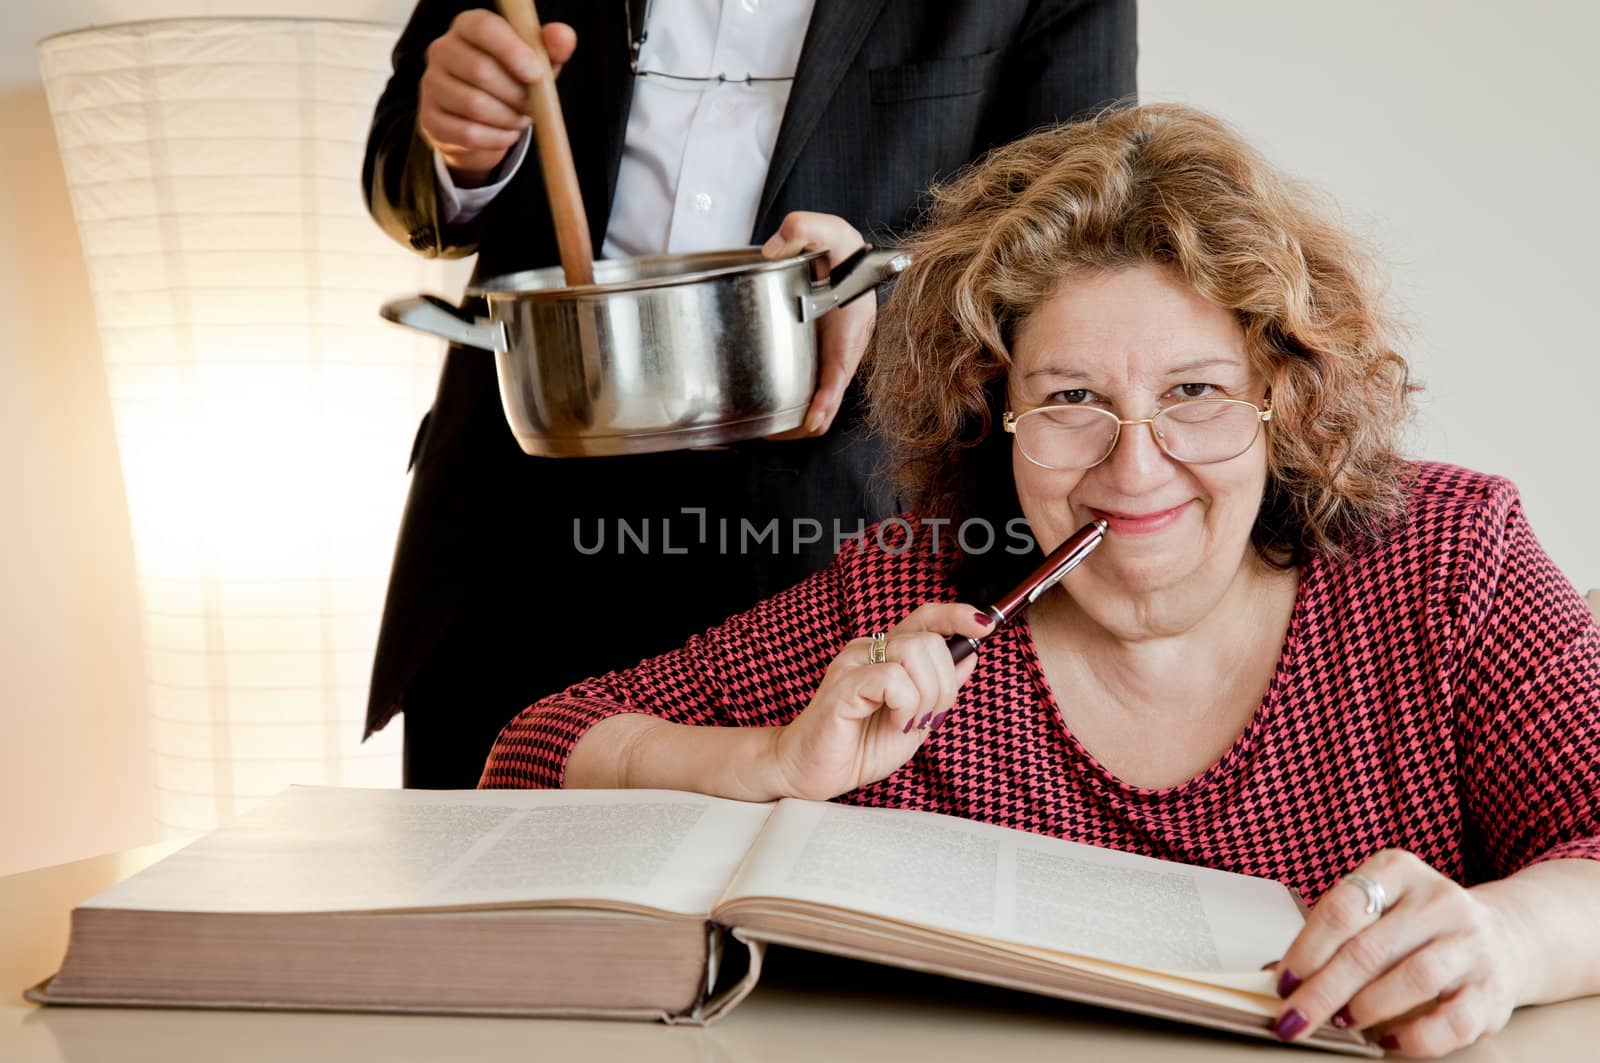 Adult woman smiling at camera over book, man behind her with pot